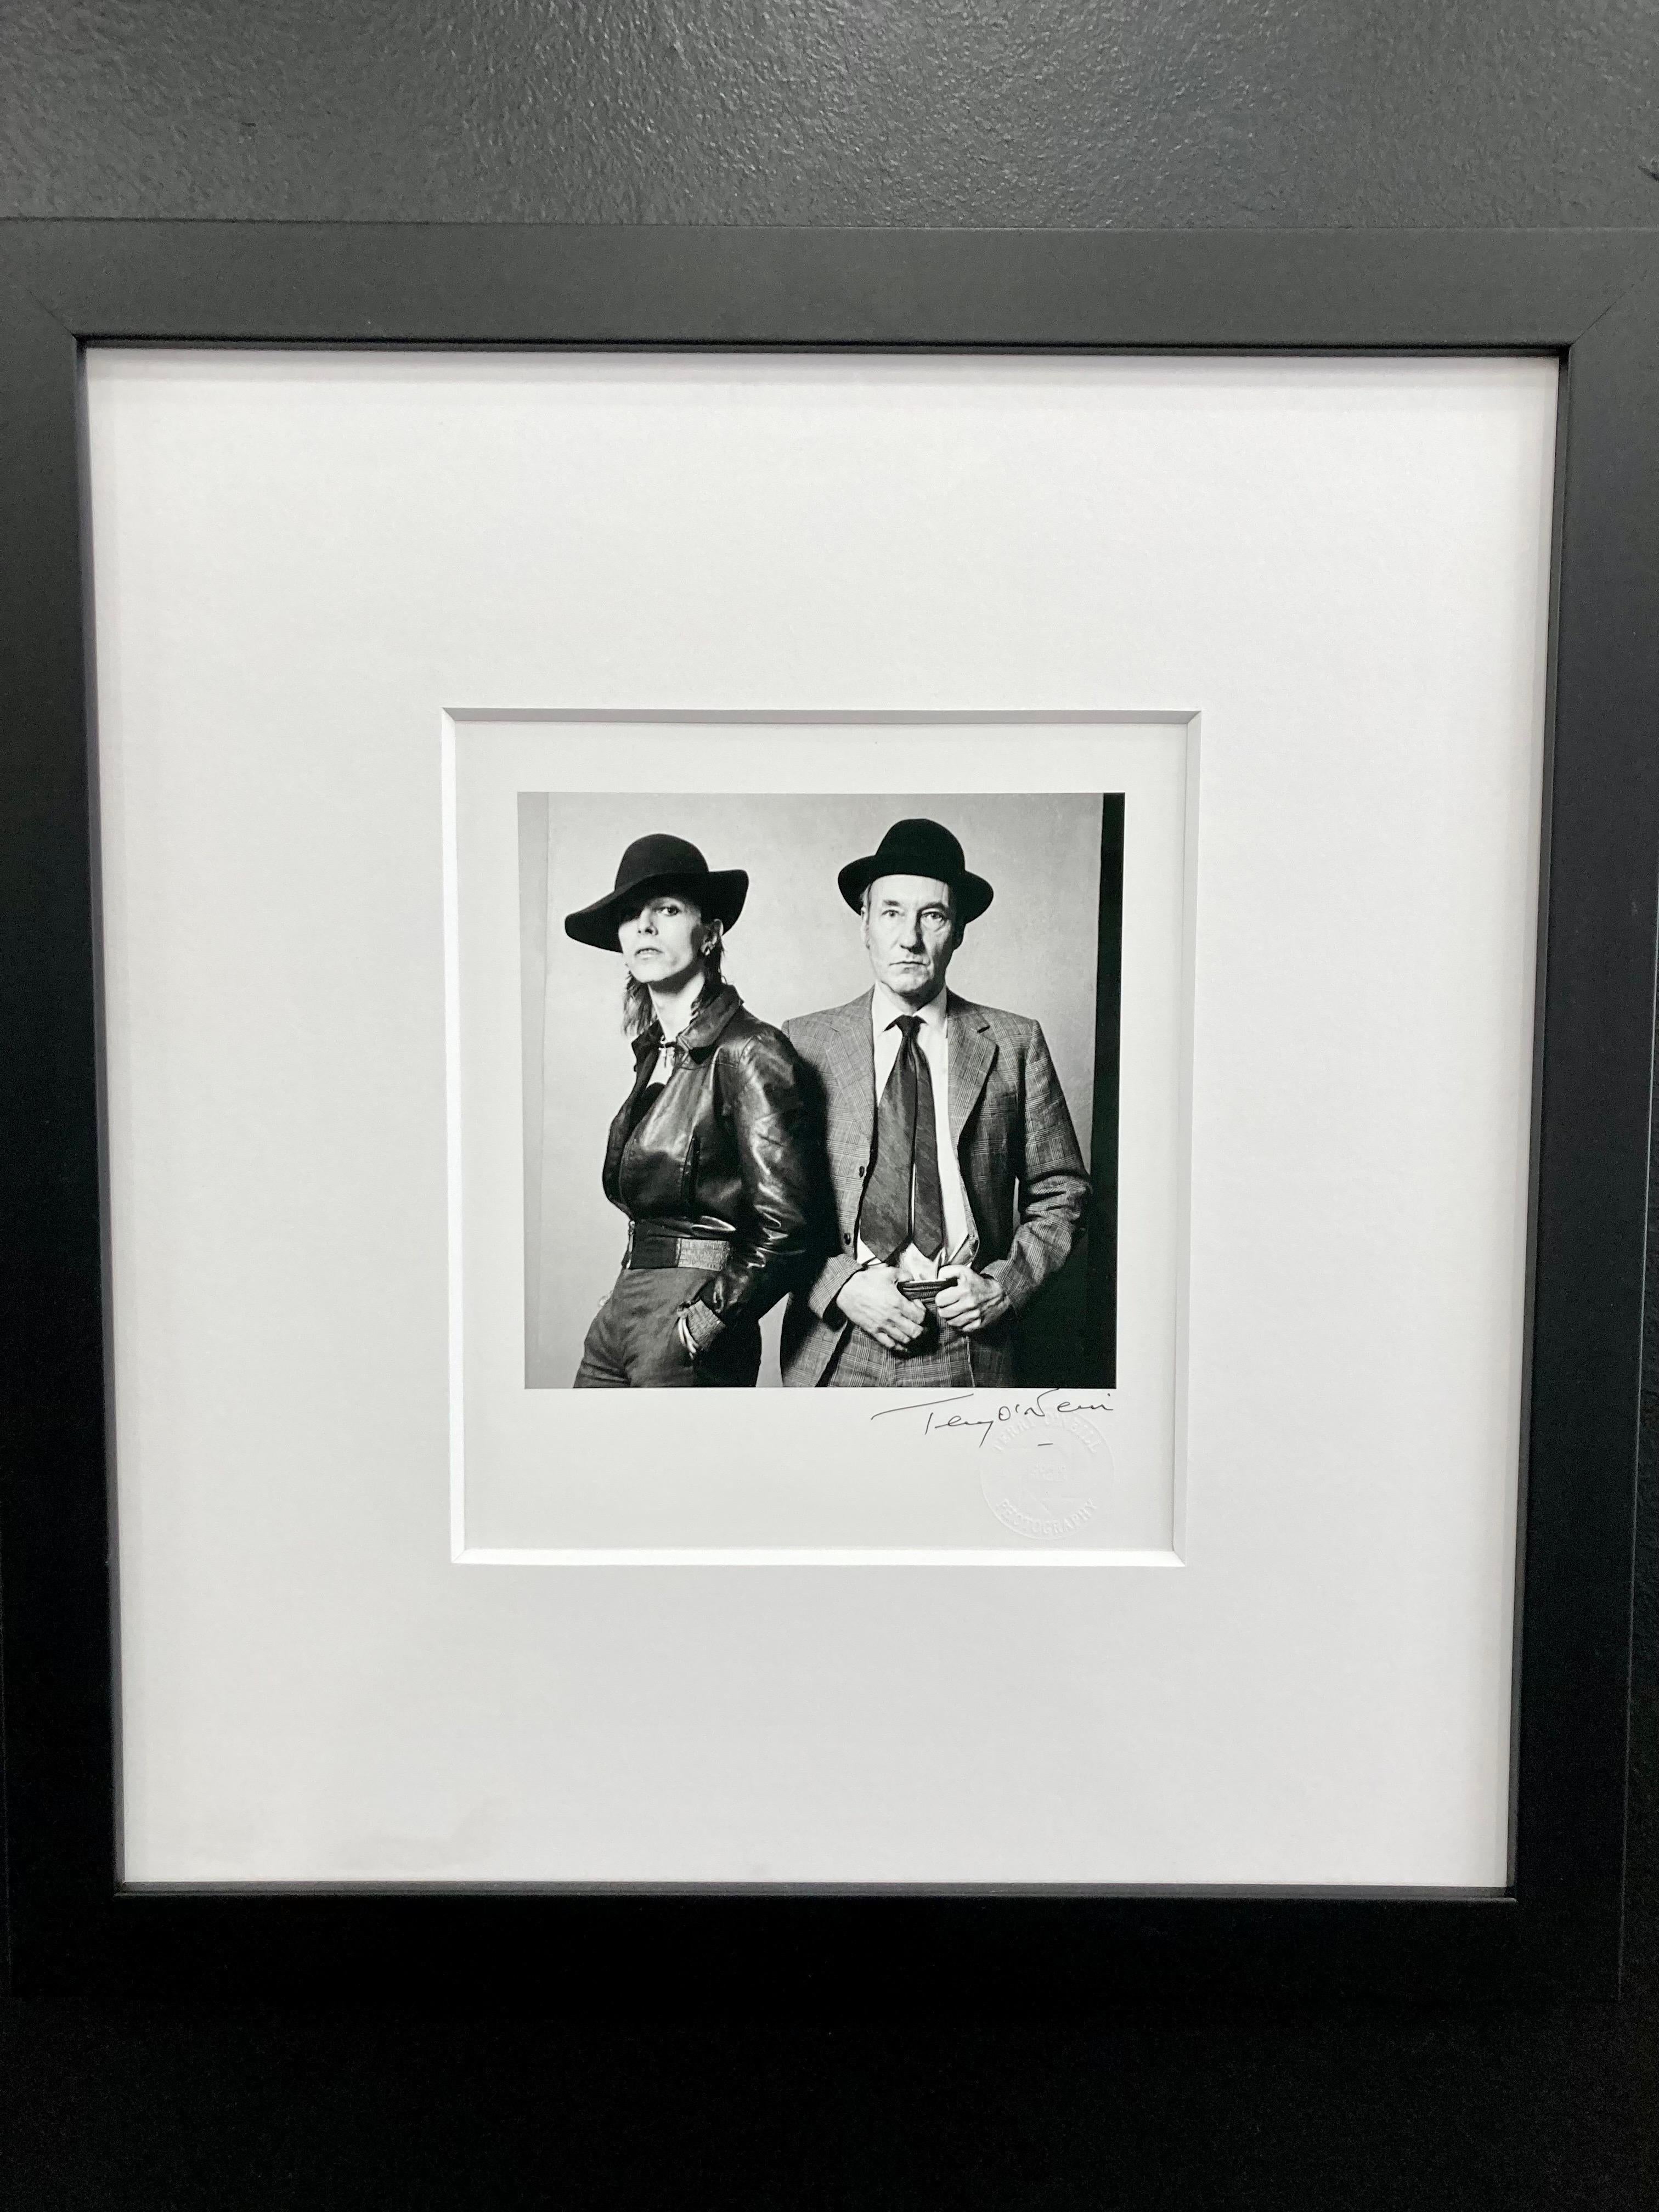 David Bowie and William Burroughs, framed signed print by Terry O'Neill For Sale 1